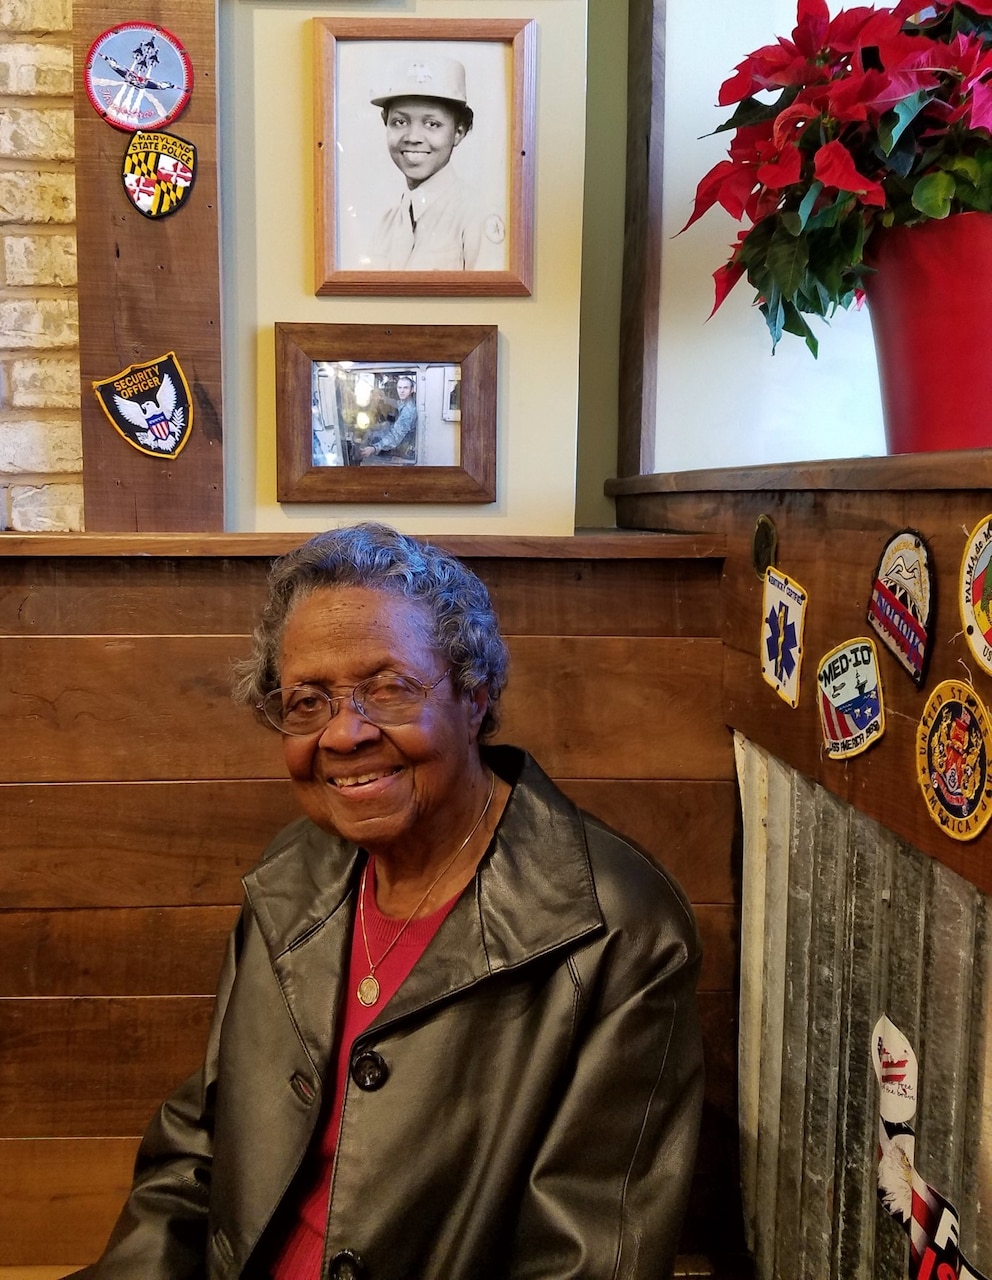 A smiling elderly woman sits in a booth. Photos are on the wall above her.